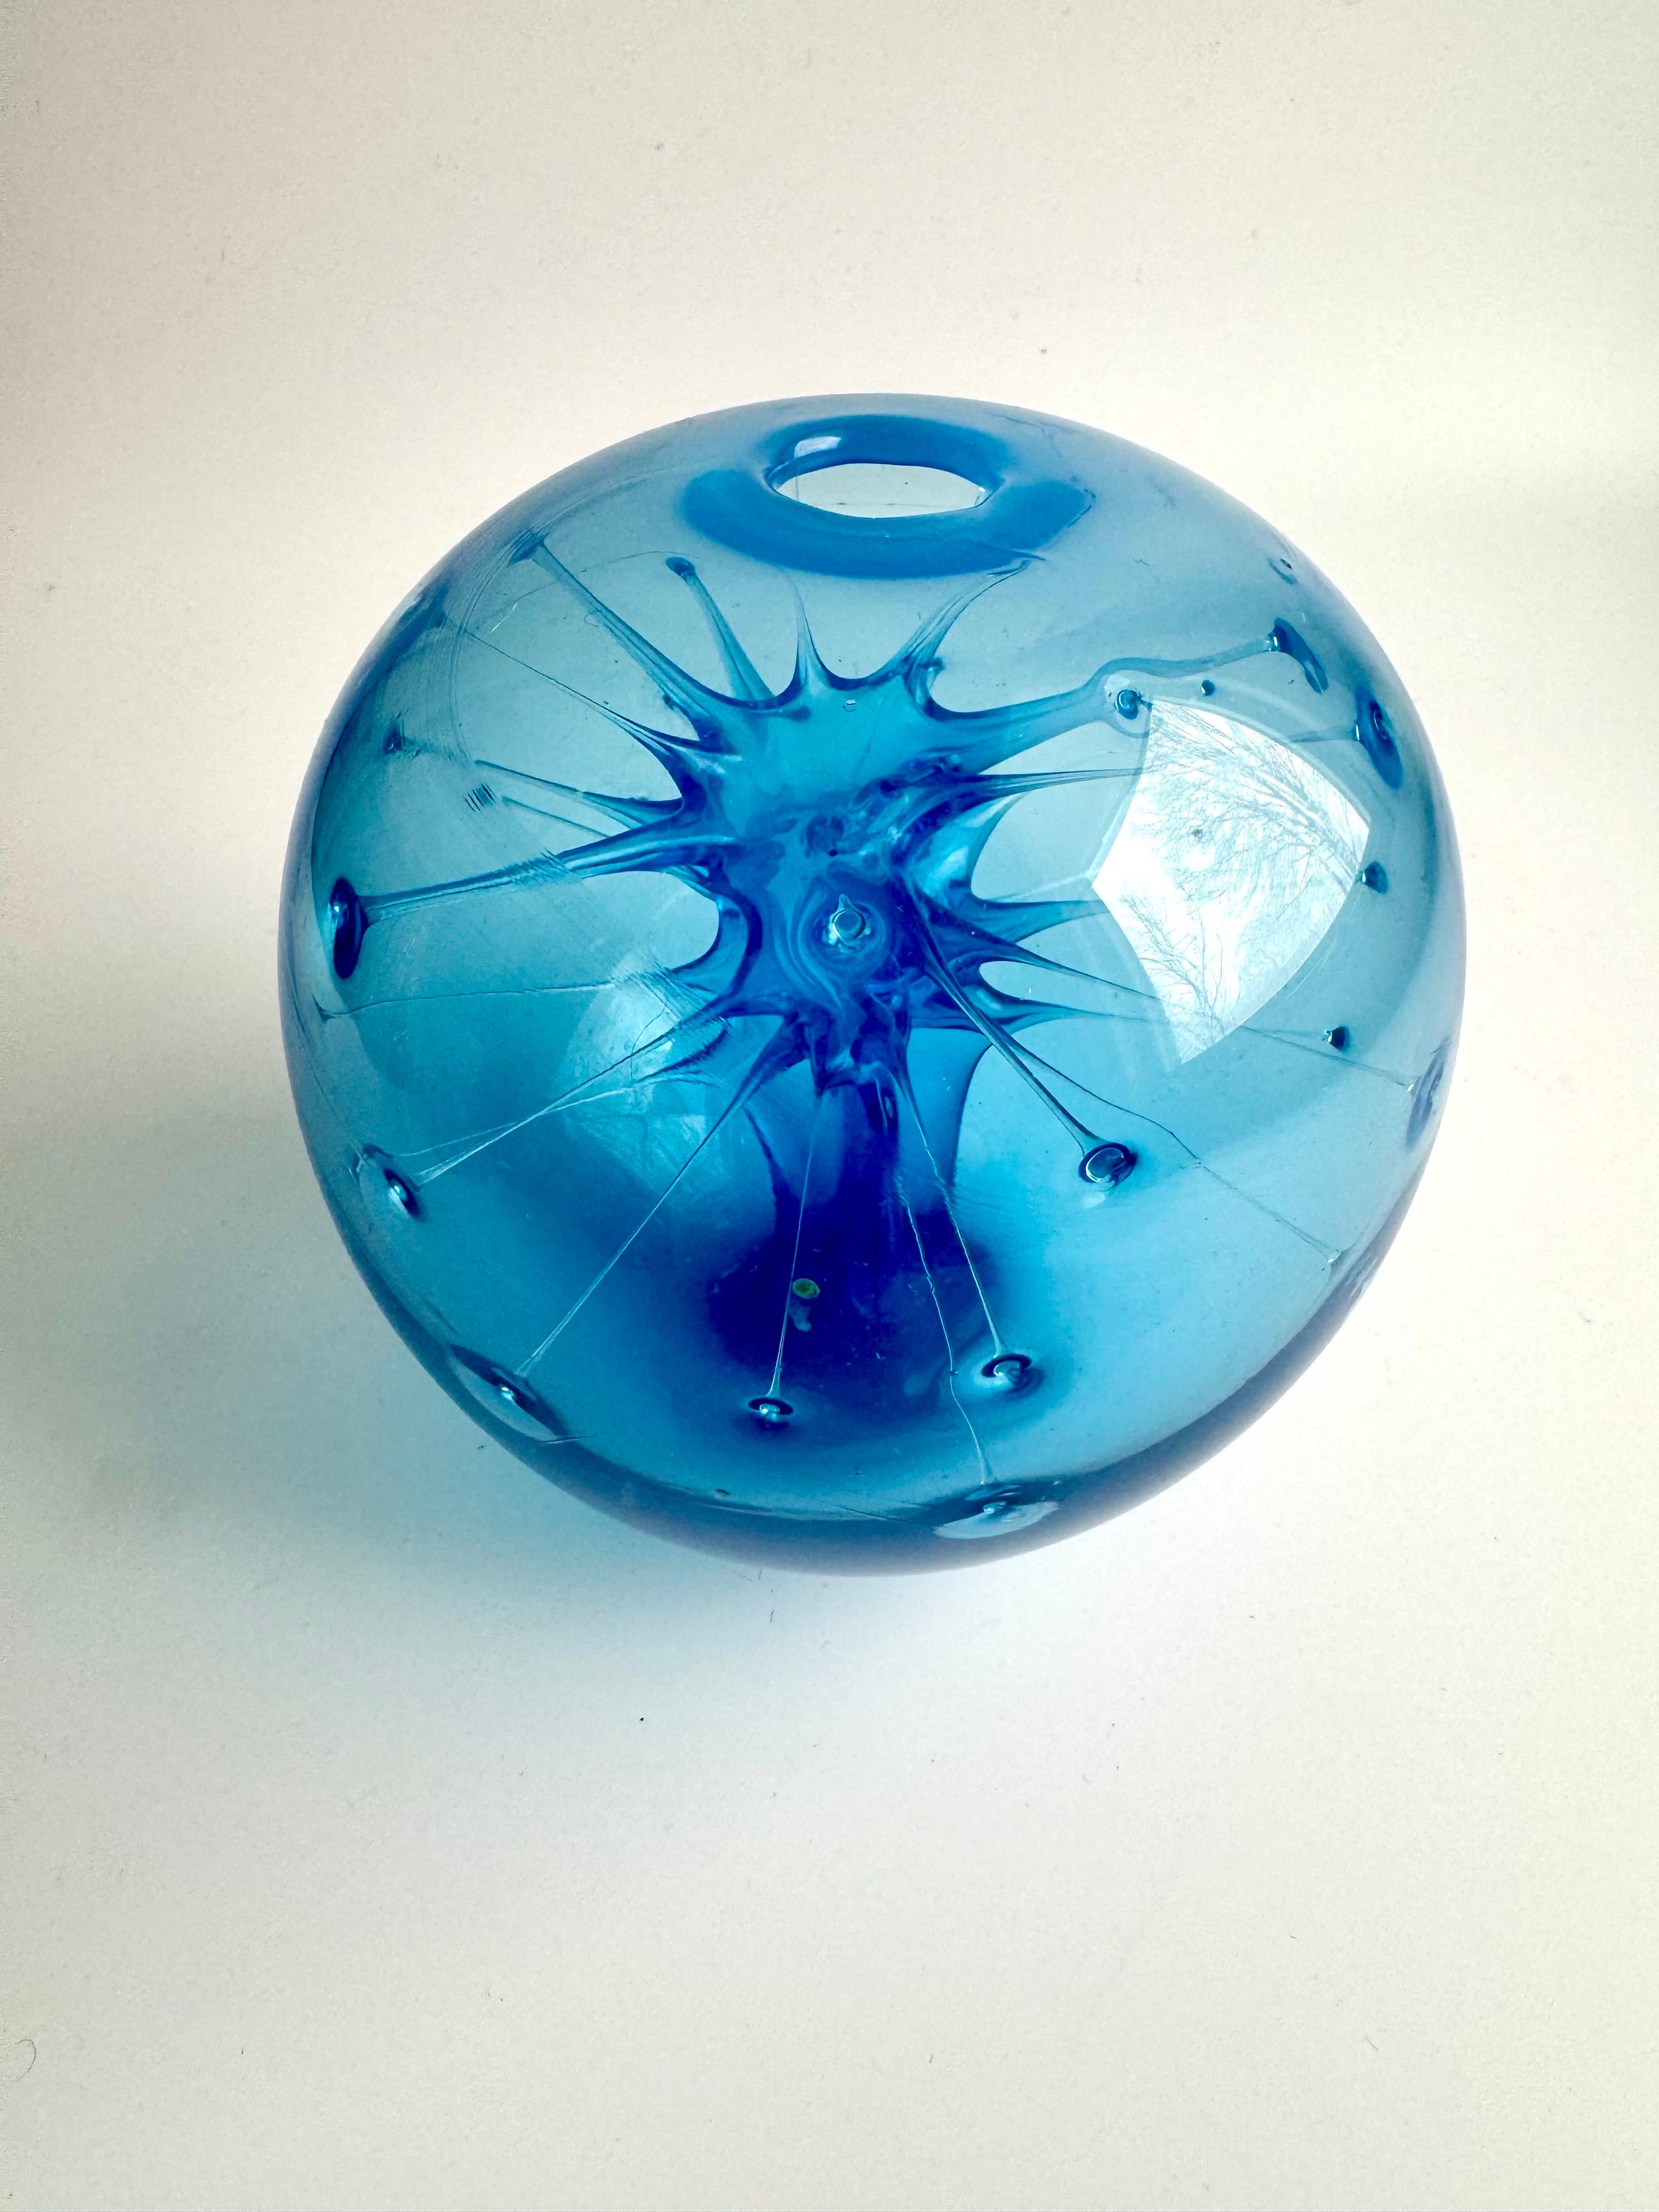 Unique small hand blown art glass decorative piece in striking blue color, signed P. Stanley 83’ 
It reminds me of a sea creature in the inside, it’s a very cool piece that could be a perfect gift for any glass collector 
About 5” diam x 5.5” H 